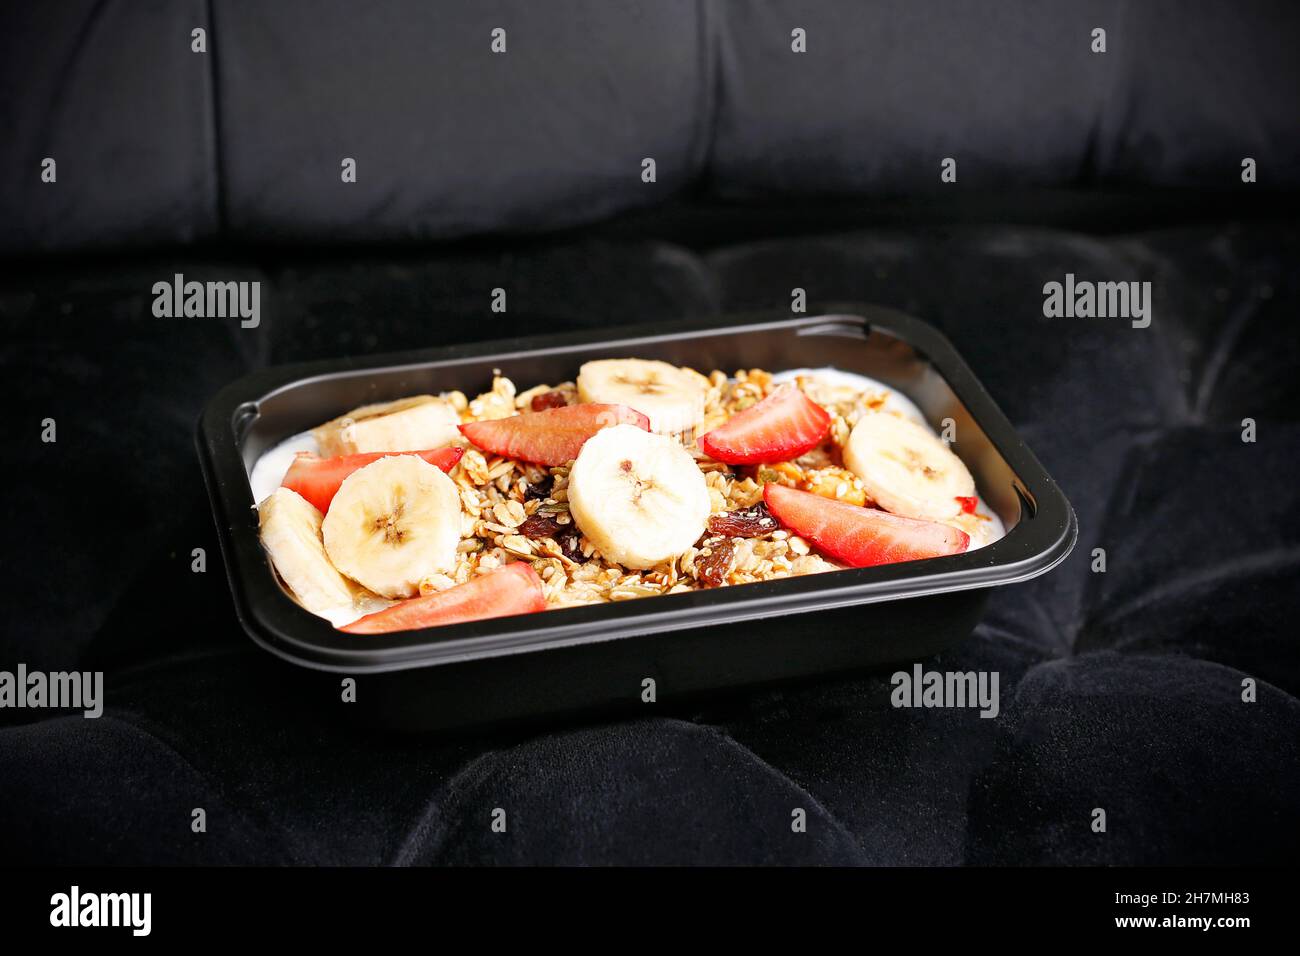 Porridge with fruits and nuts. A healthy nutritious breakfast in a box. Appetizing ready-to-go dish served in a disposable box. Culinary photography. Stock Photo